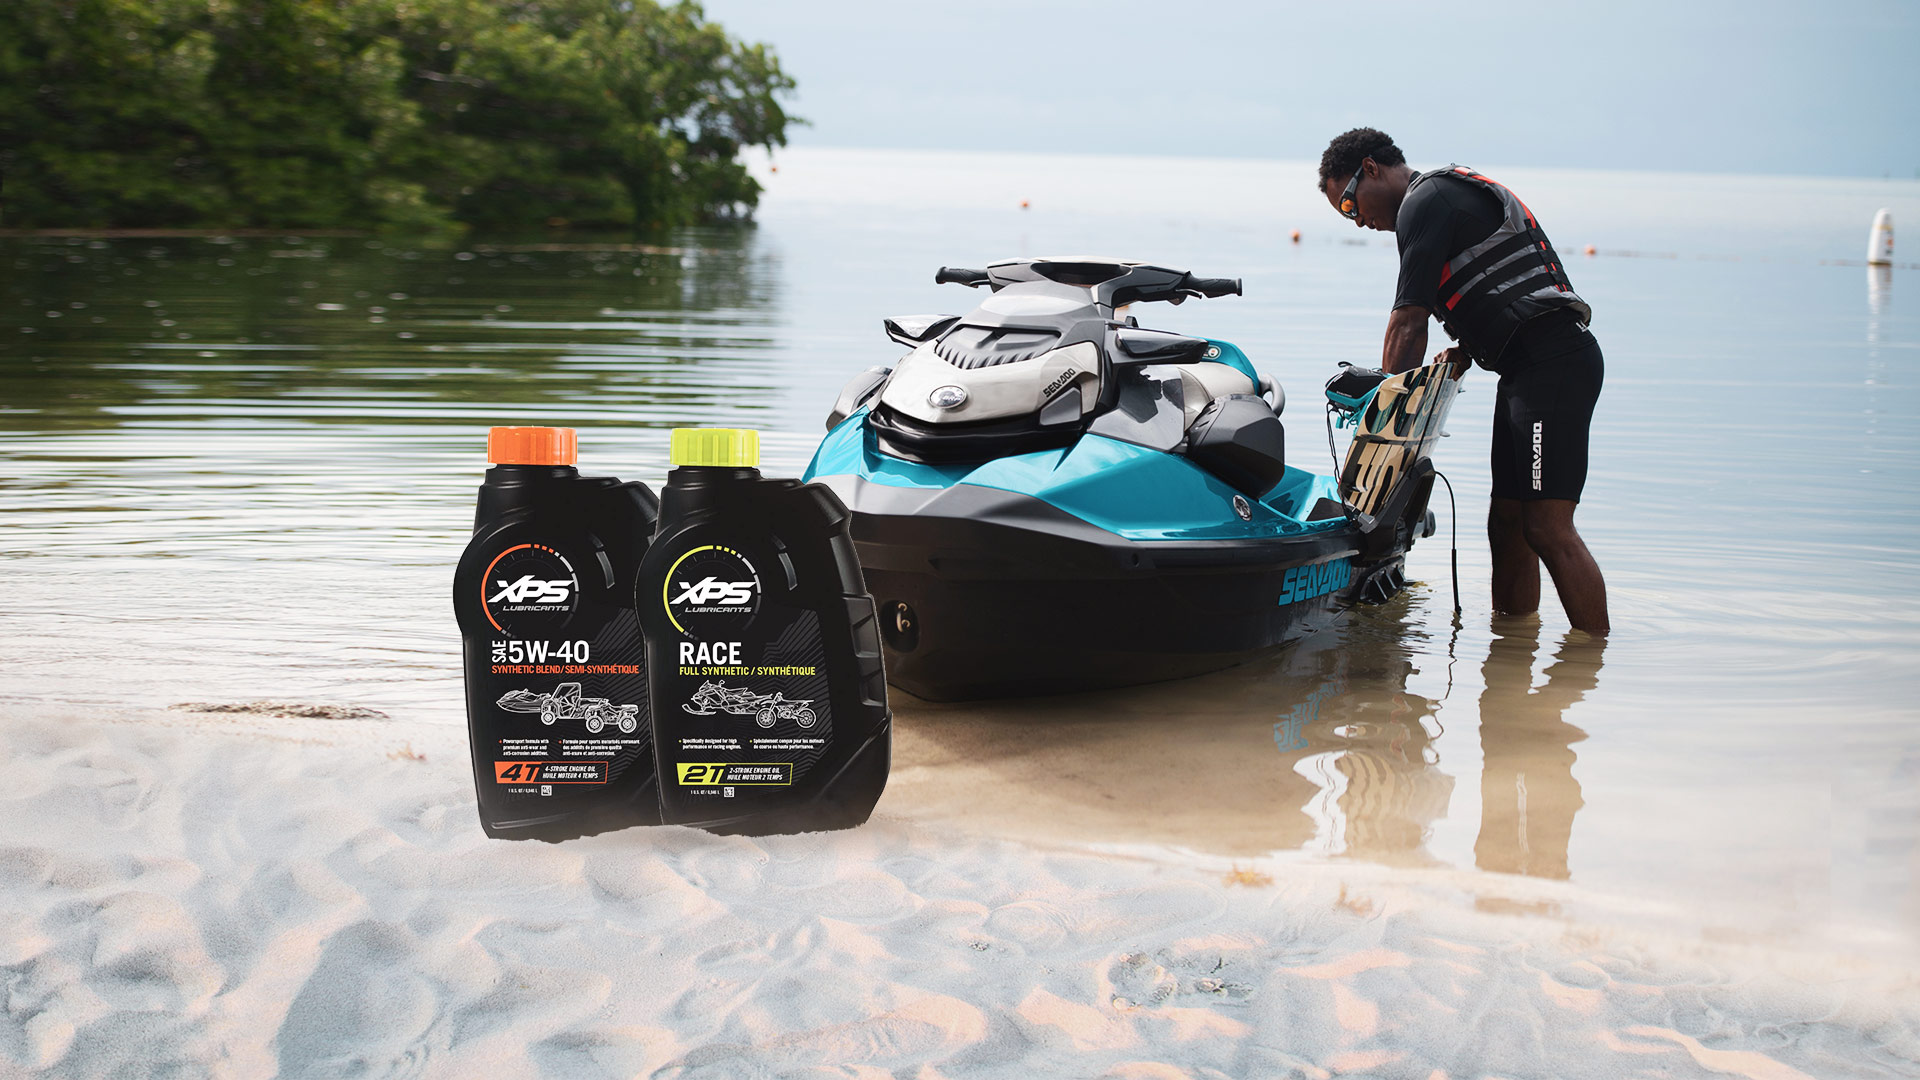 XPS oil product for Sea-Doo personal watercrafts